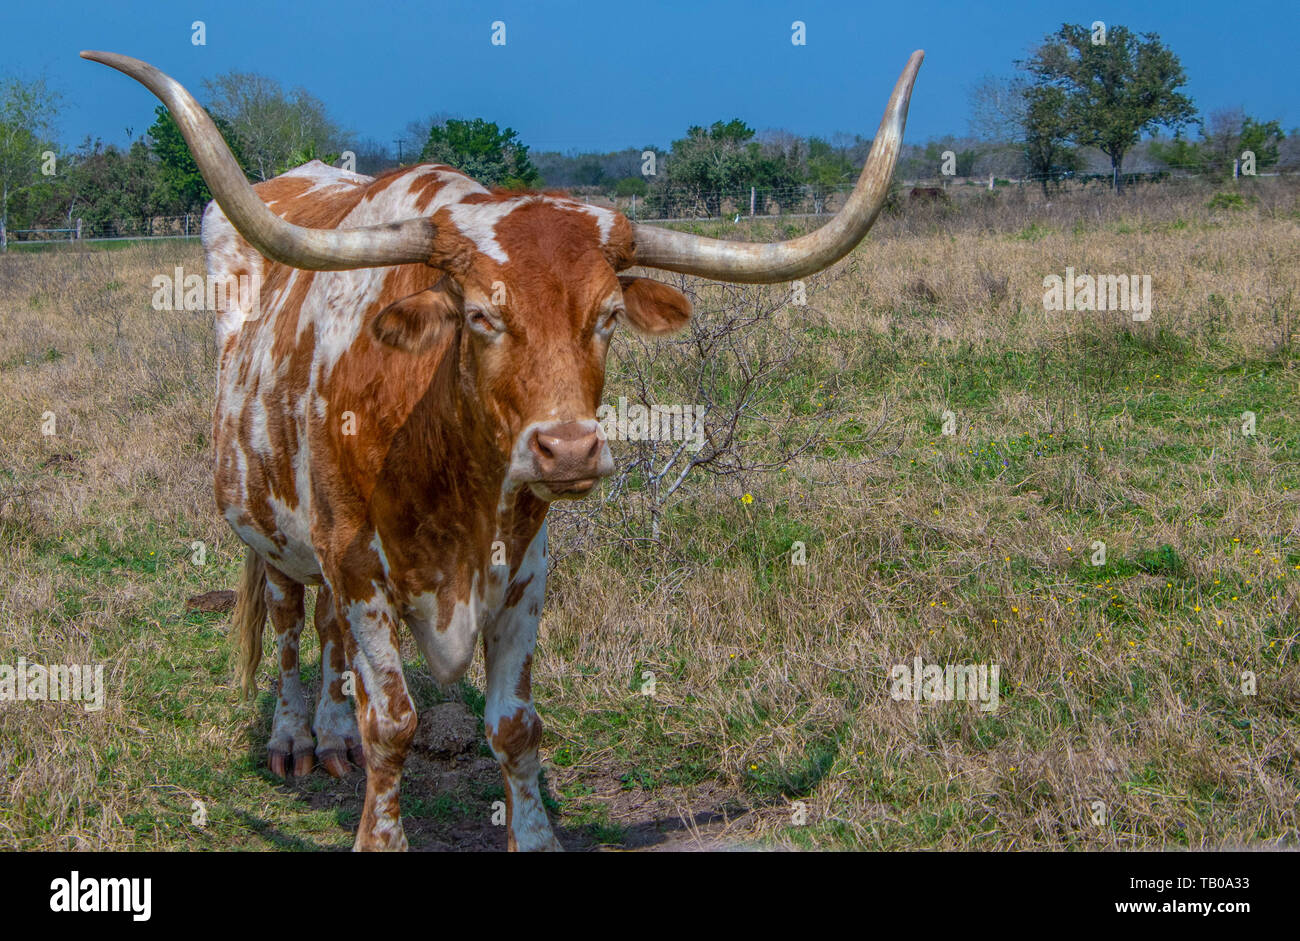 Brown and white Texas longhorn steer on the ranch Stock Photo